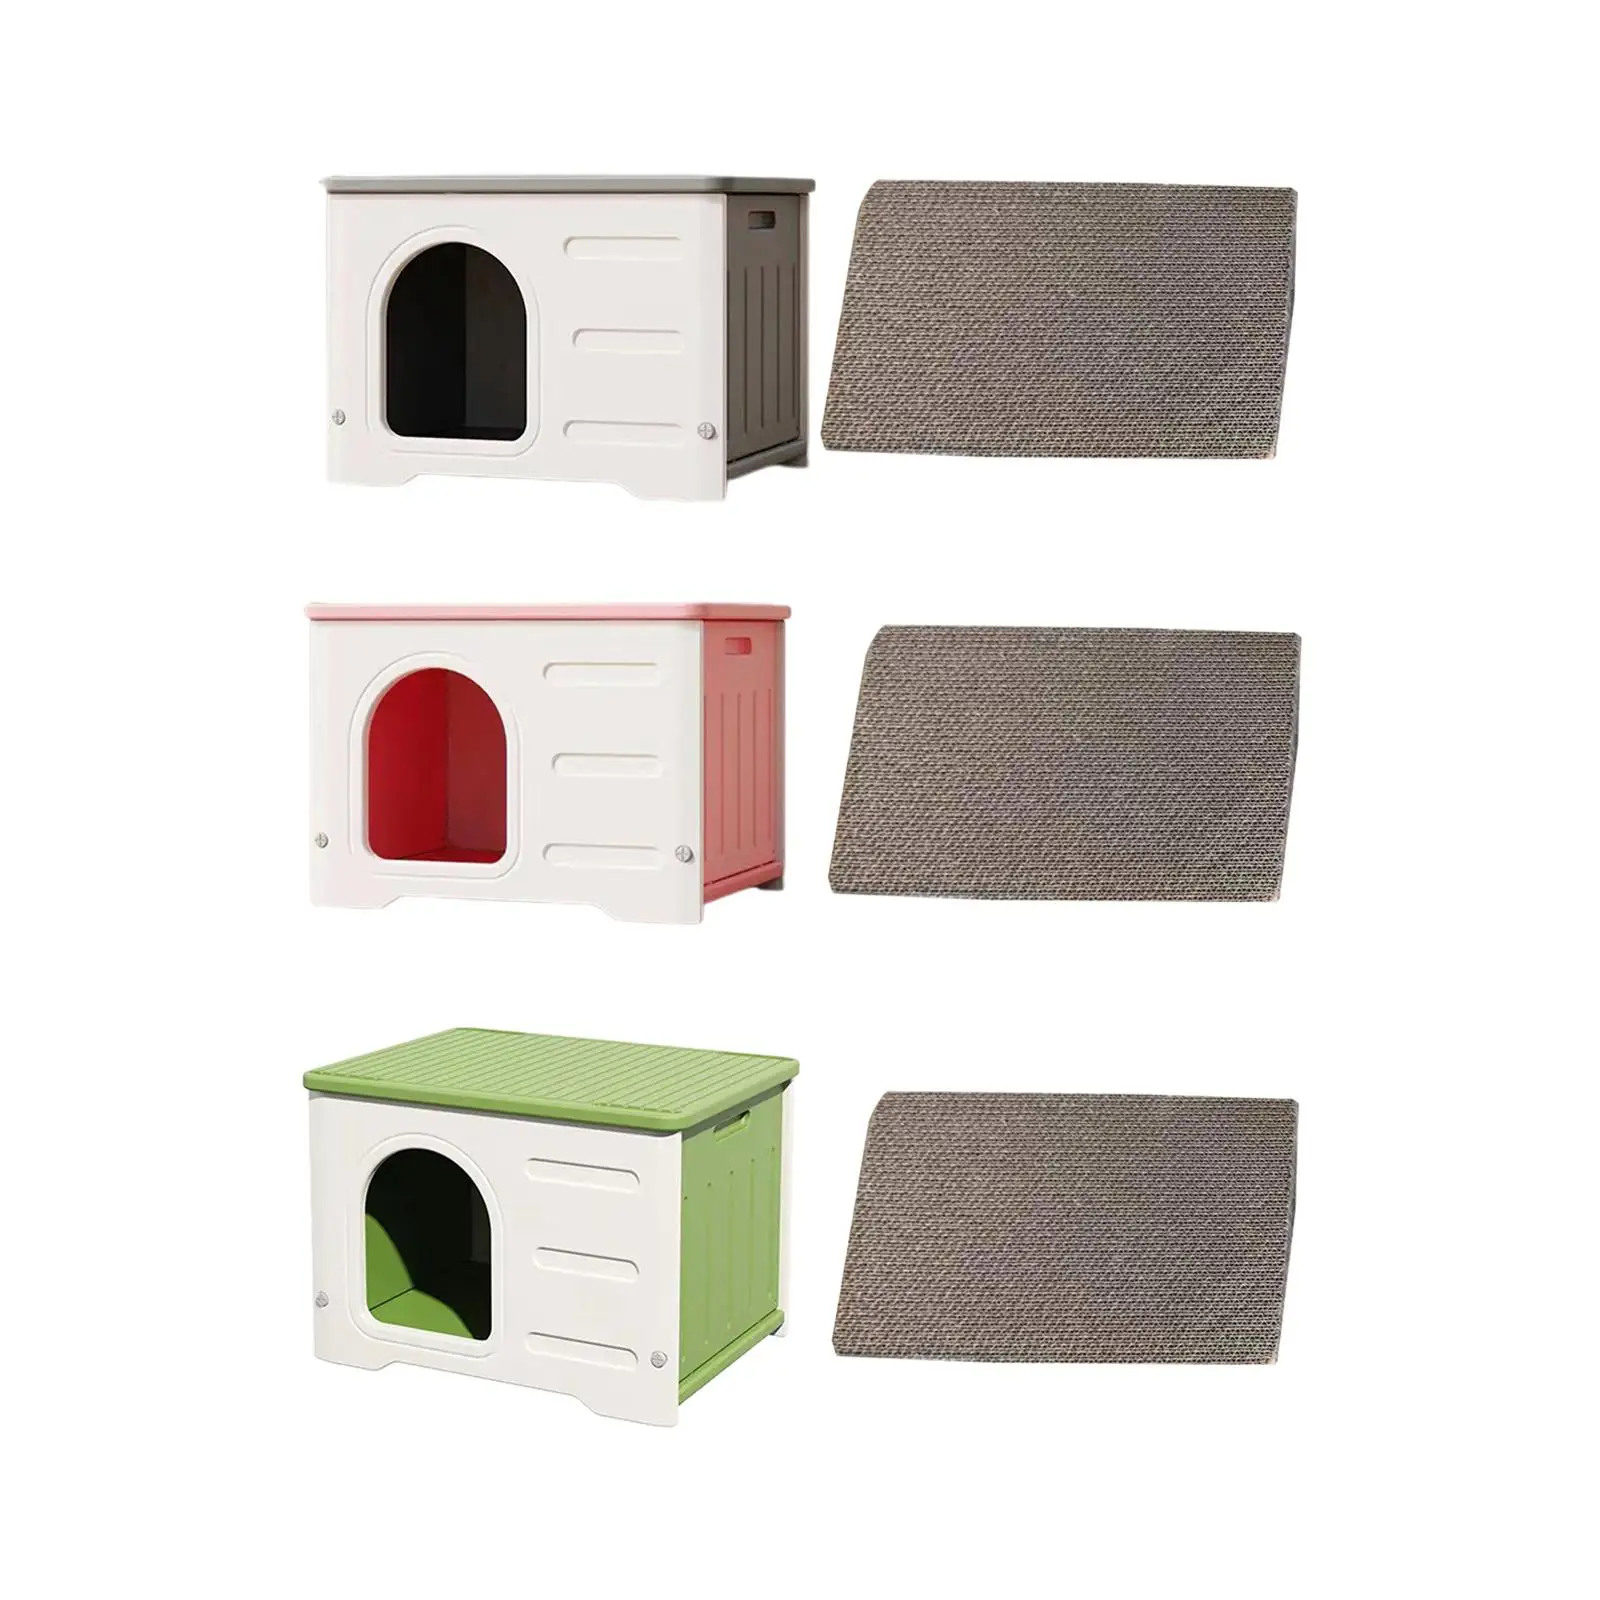 Stray Cats Shelter Weatherproof Bed House for Outdoor Cats Rabbit